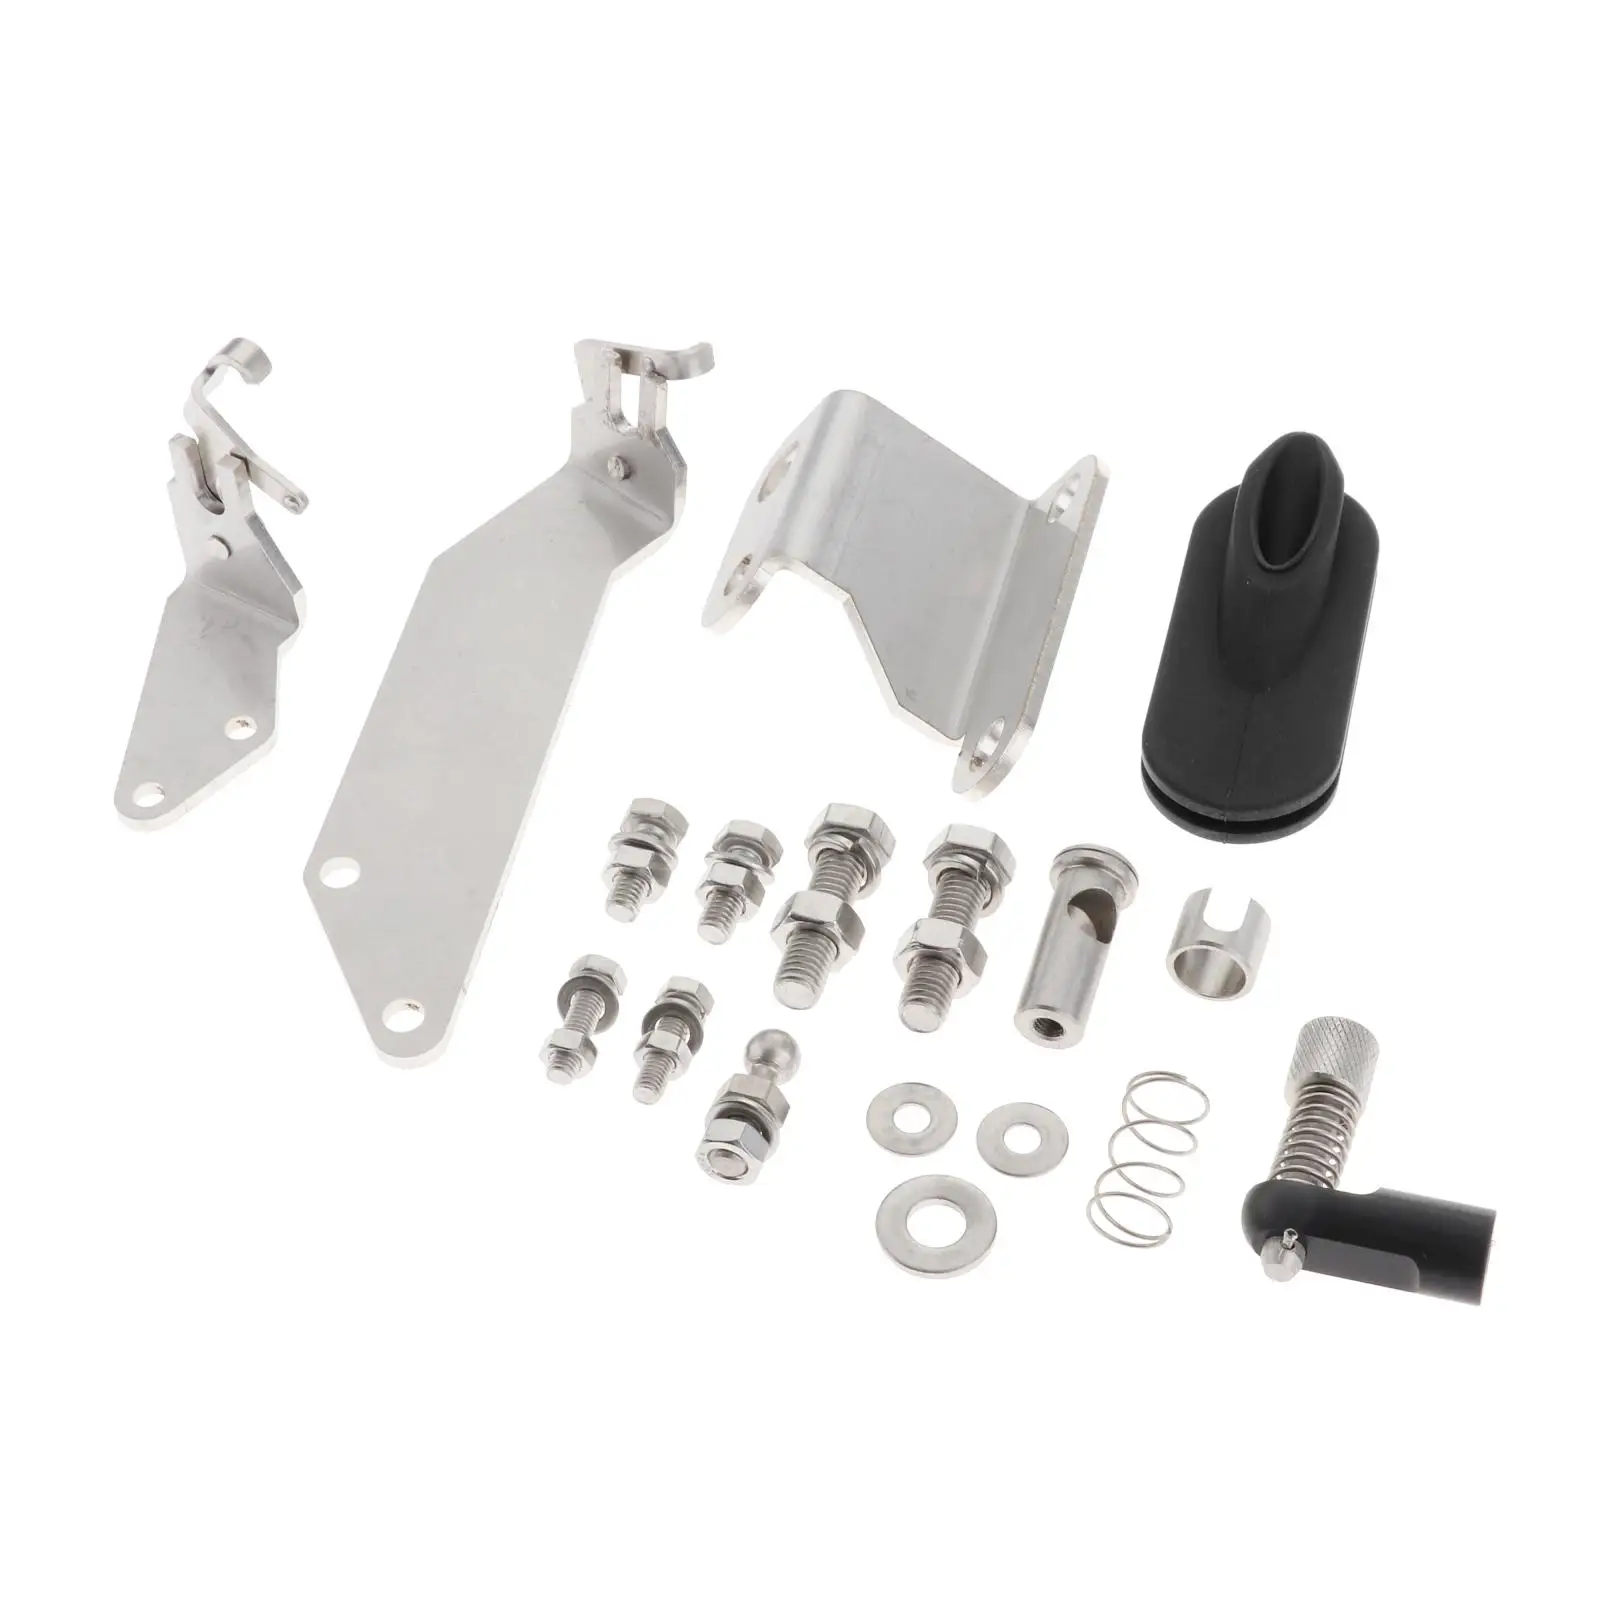 Remote Control Fitting Kit for Tohatsu Outboard Motor 9.9HP 15HP 18HP 398-83880; 398838801M